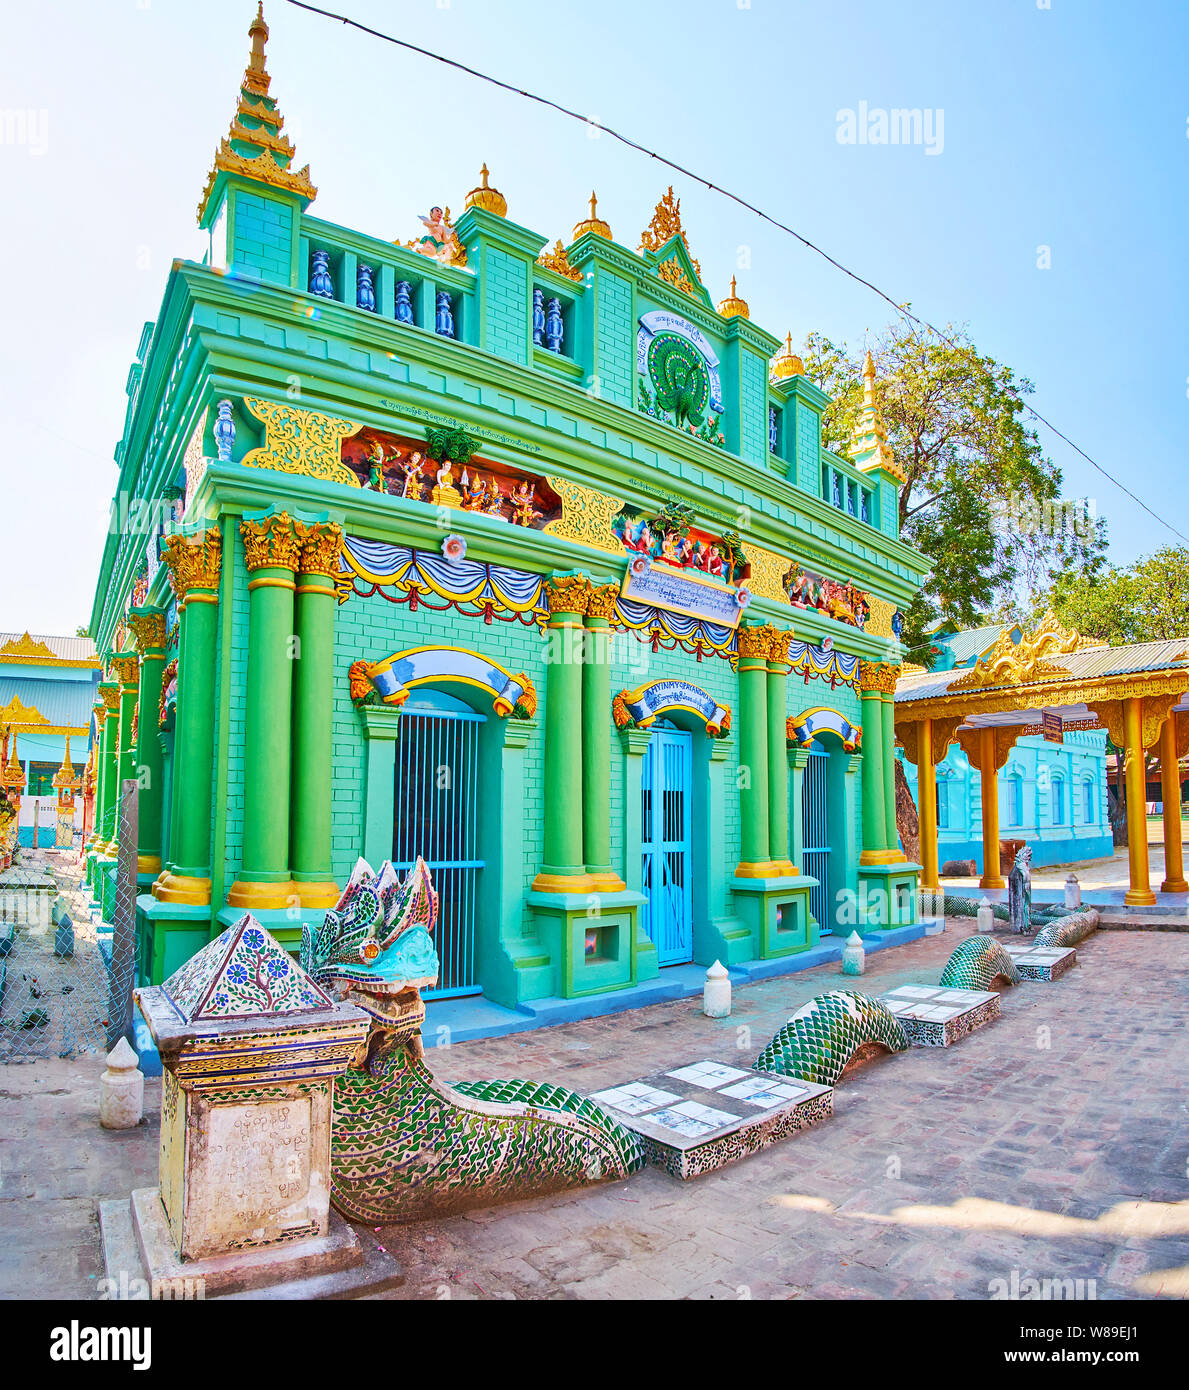 MONYWA, MYANMAR - FEBRUARY 22, 2018: The green temple of Thanboddhay monastery with relief patterns, pillars and sculpture of Naga serpent in front of Stock Photo